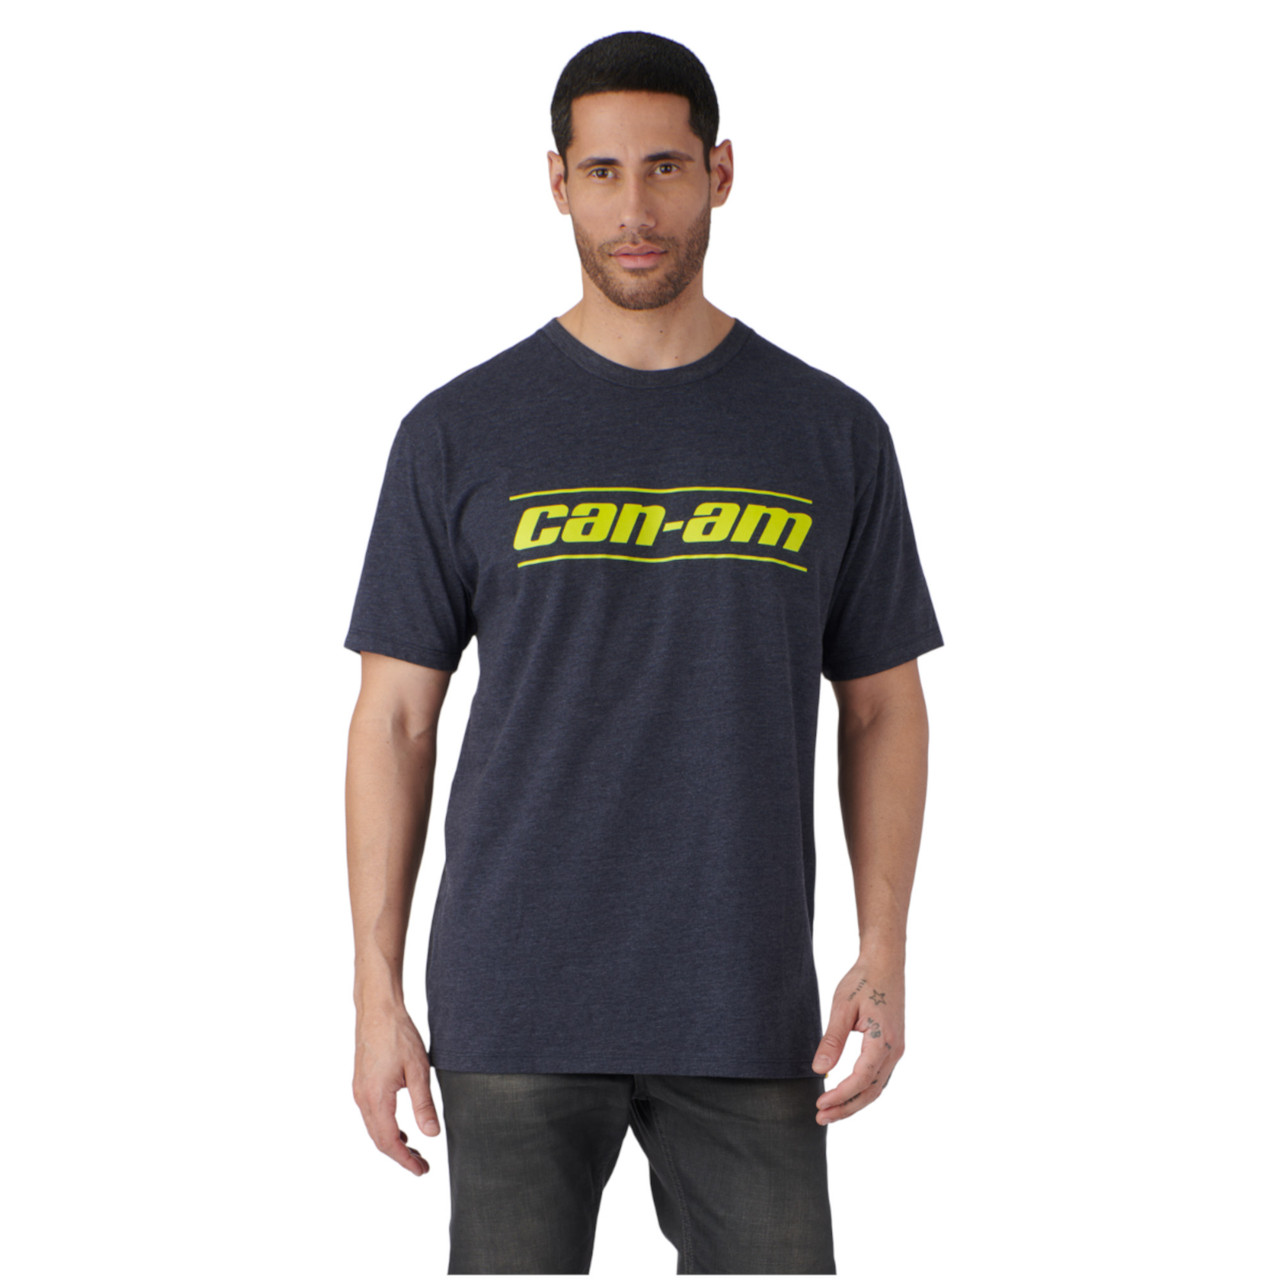 Can-Am New OEM, Men's Small Cotton Signature Branded T-Shirt, 4547540489